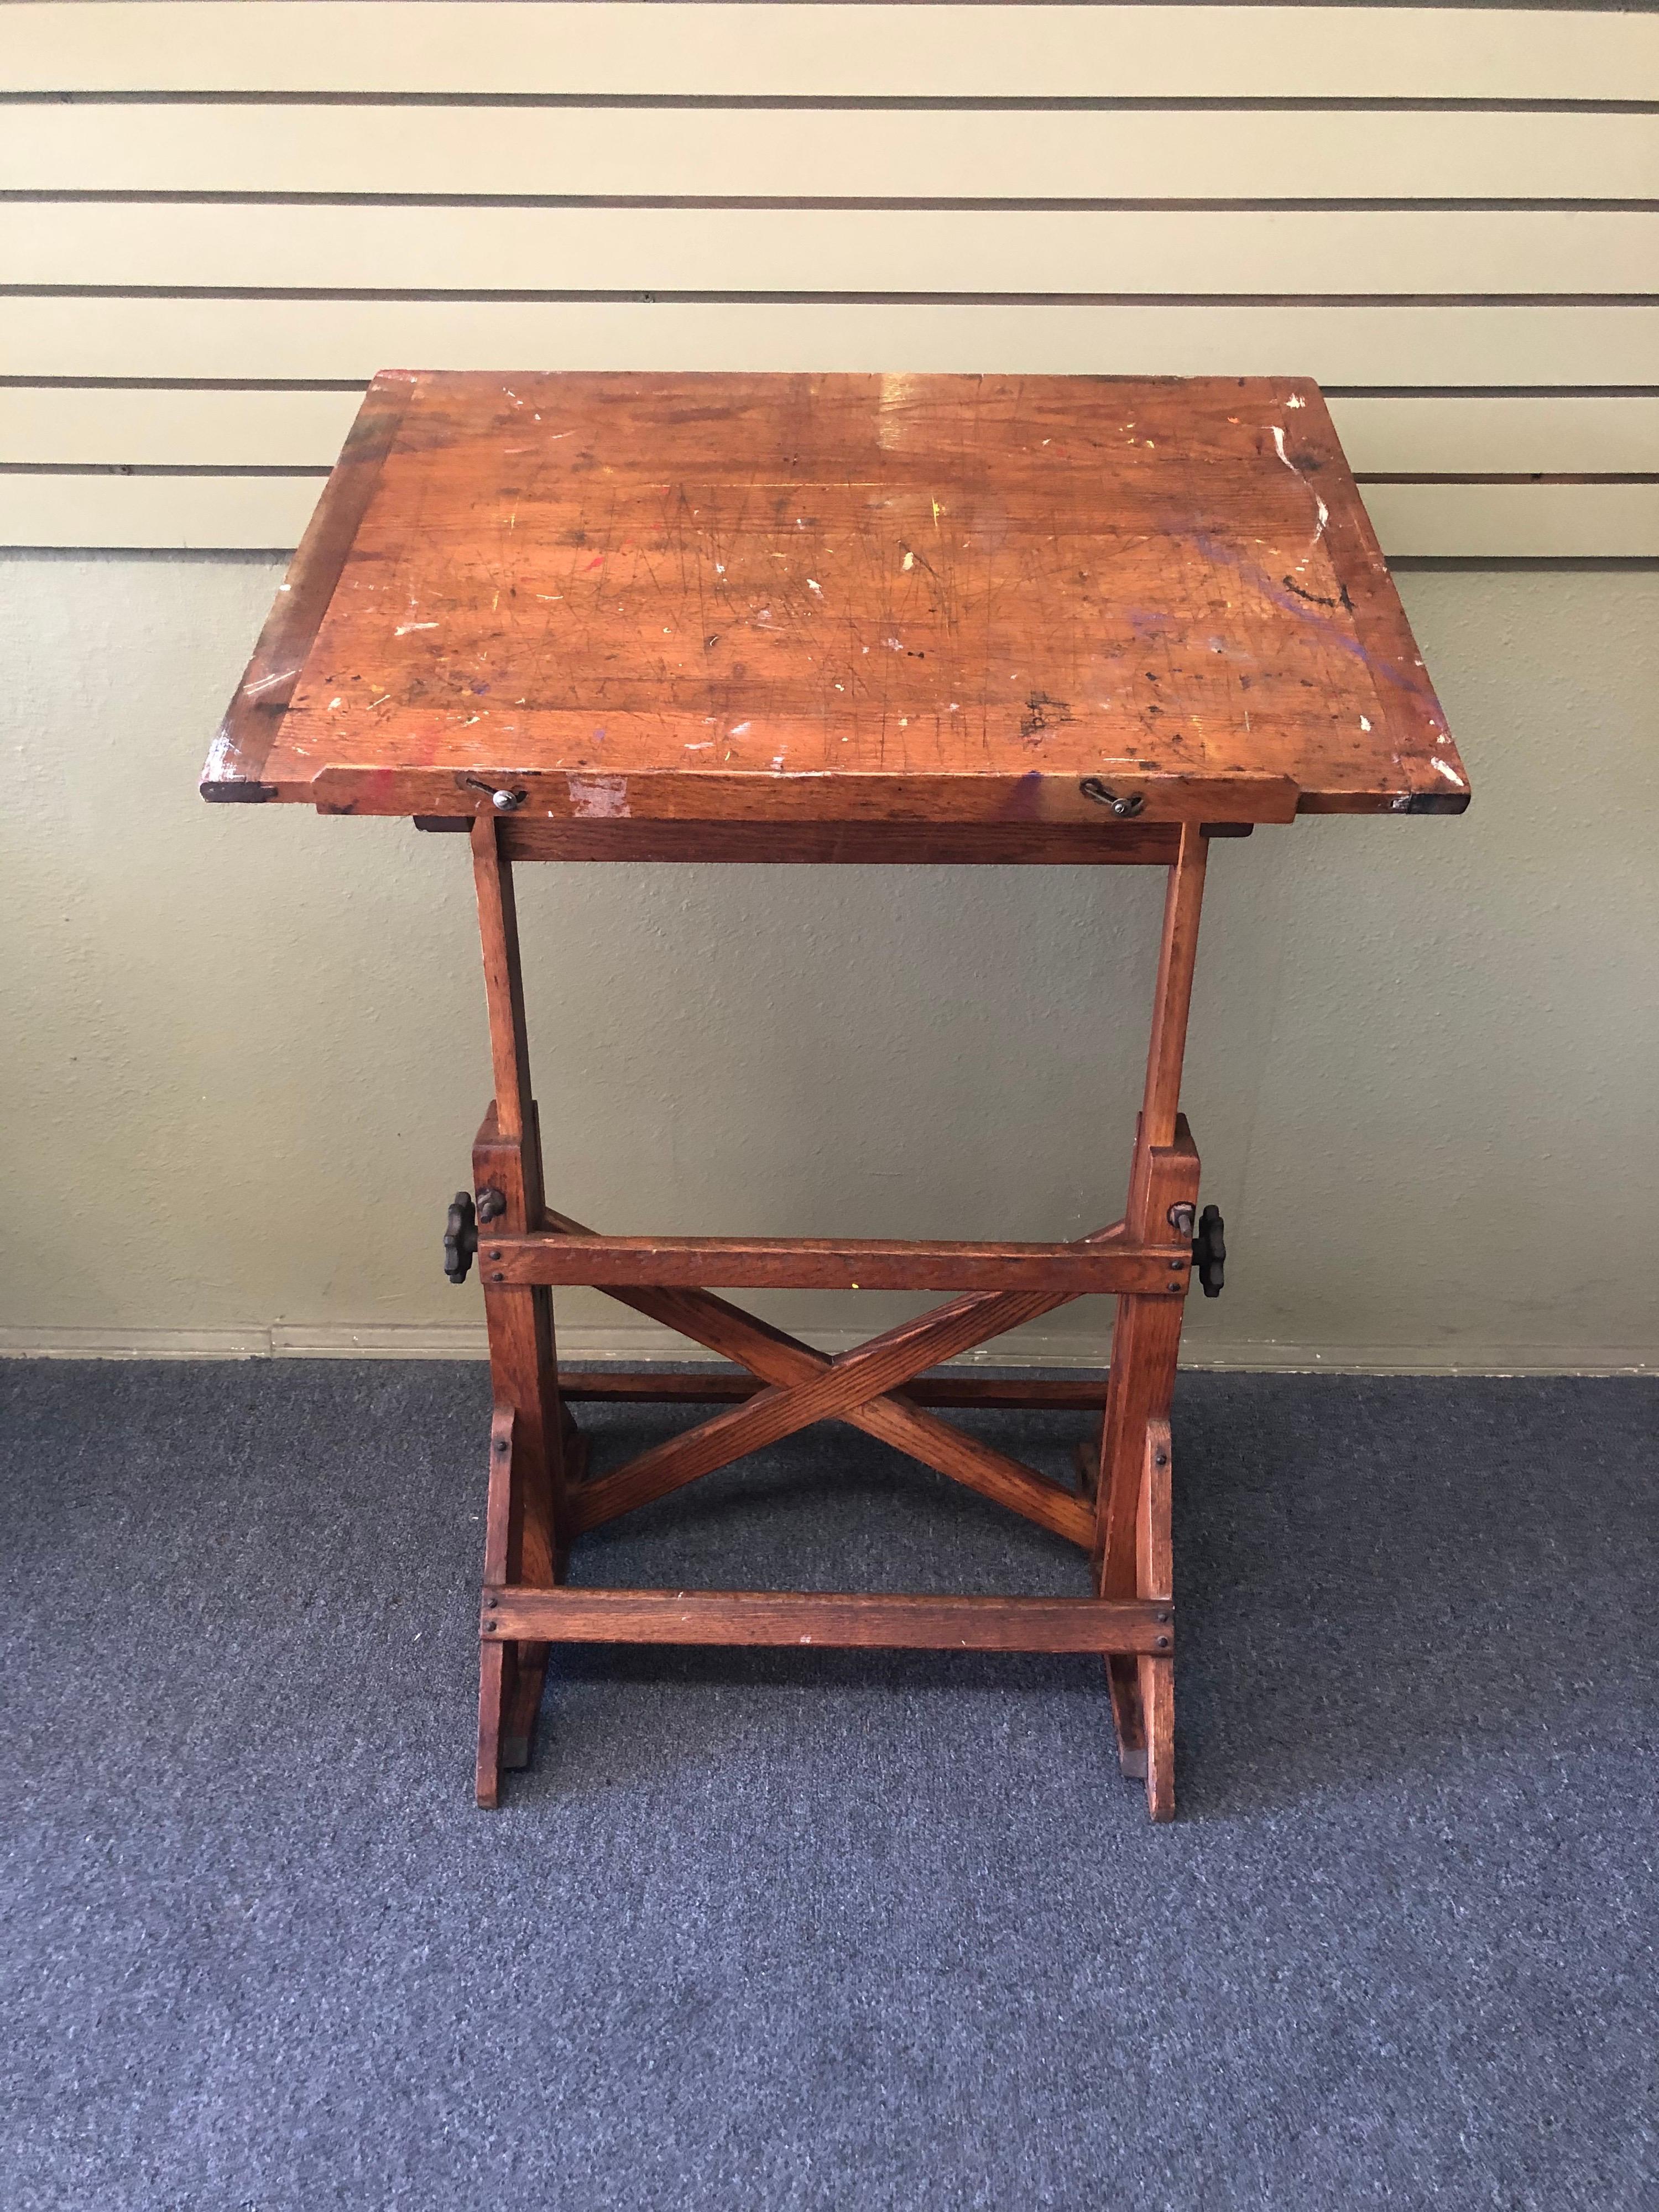 Wonderful vintage industrial drafting table or desk by The F. Weber Co. of Philadelphia, circa 1940s. Table features a beautifully crafted oak base with aged cast iron hardware. Height and angle are fully adjustable. A great, versatile size that can